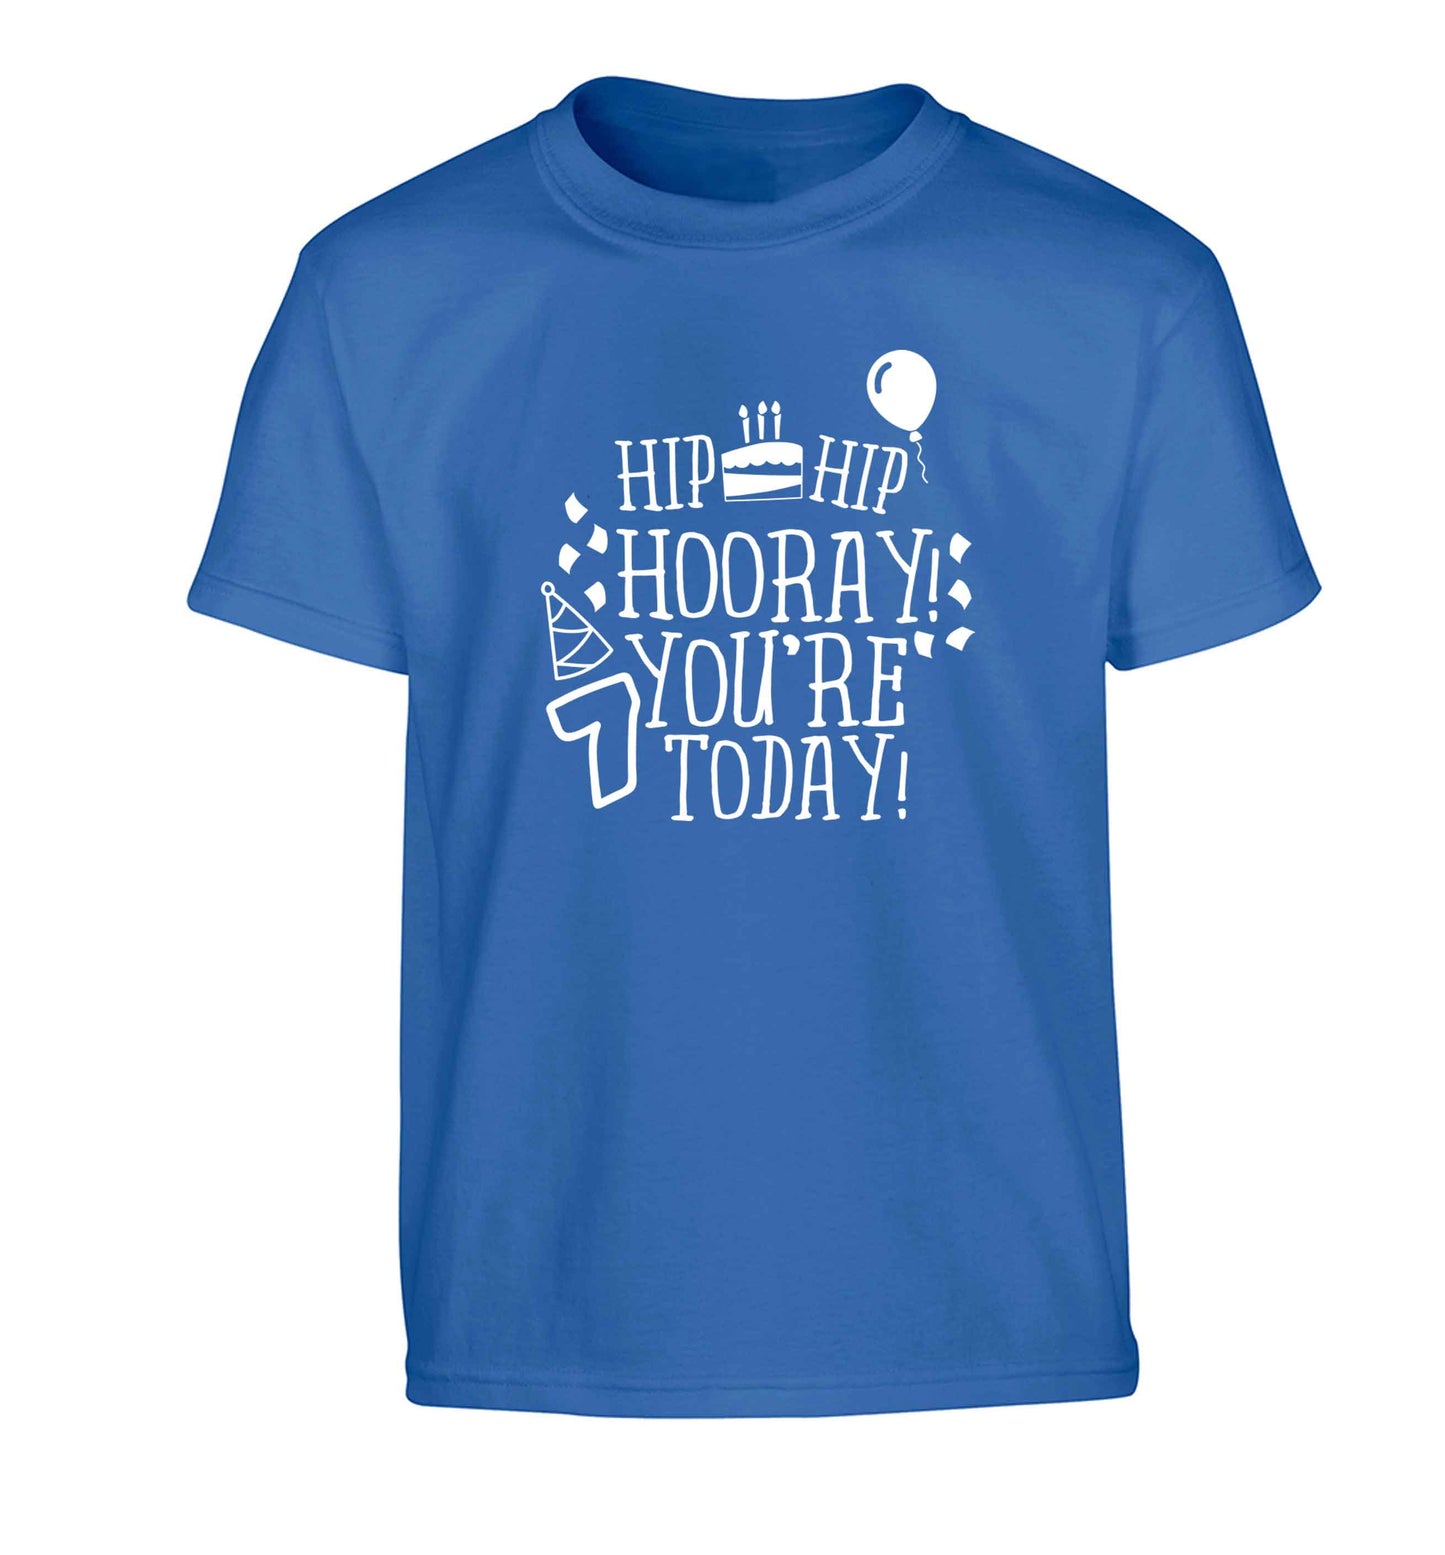 Hip hip hooray you're seven today! Children's blue Tshirt 12-13 Years